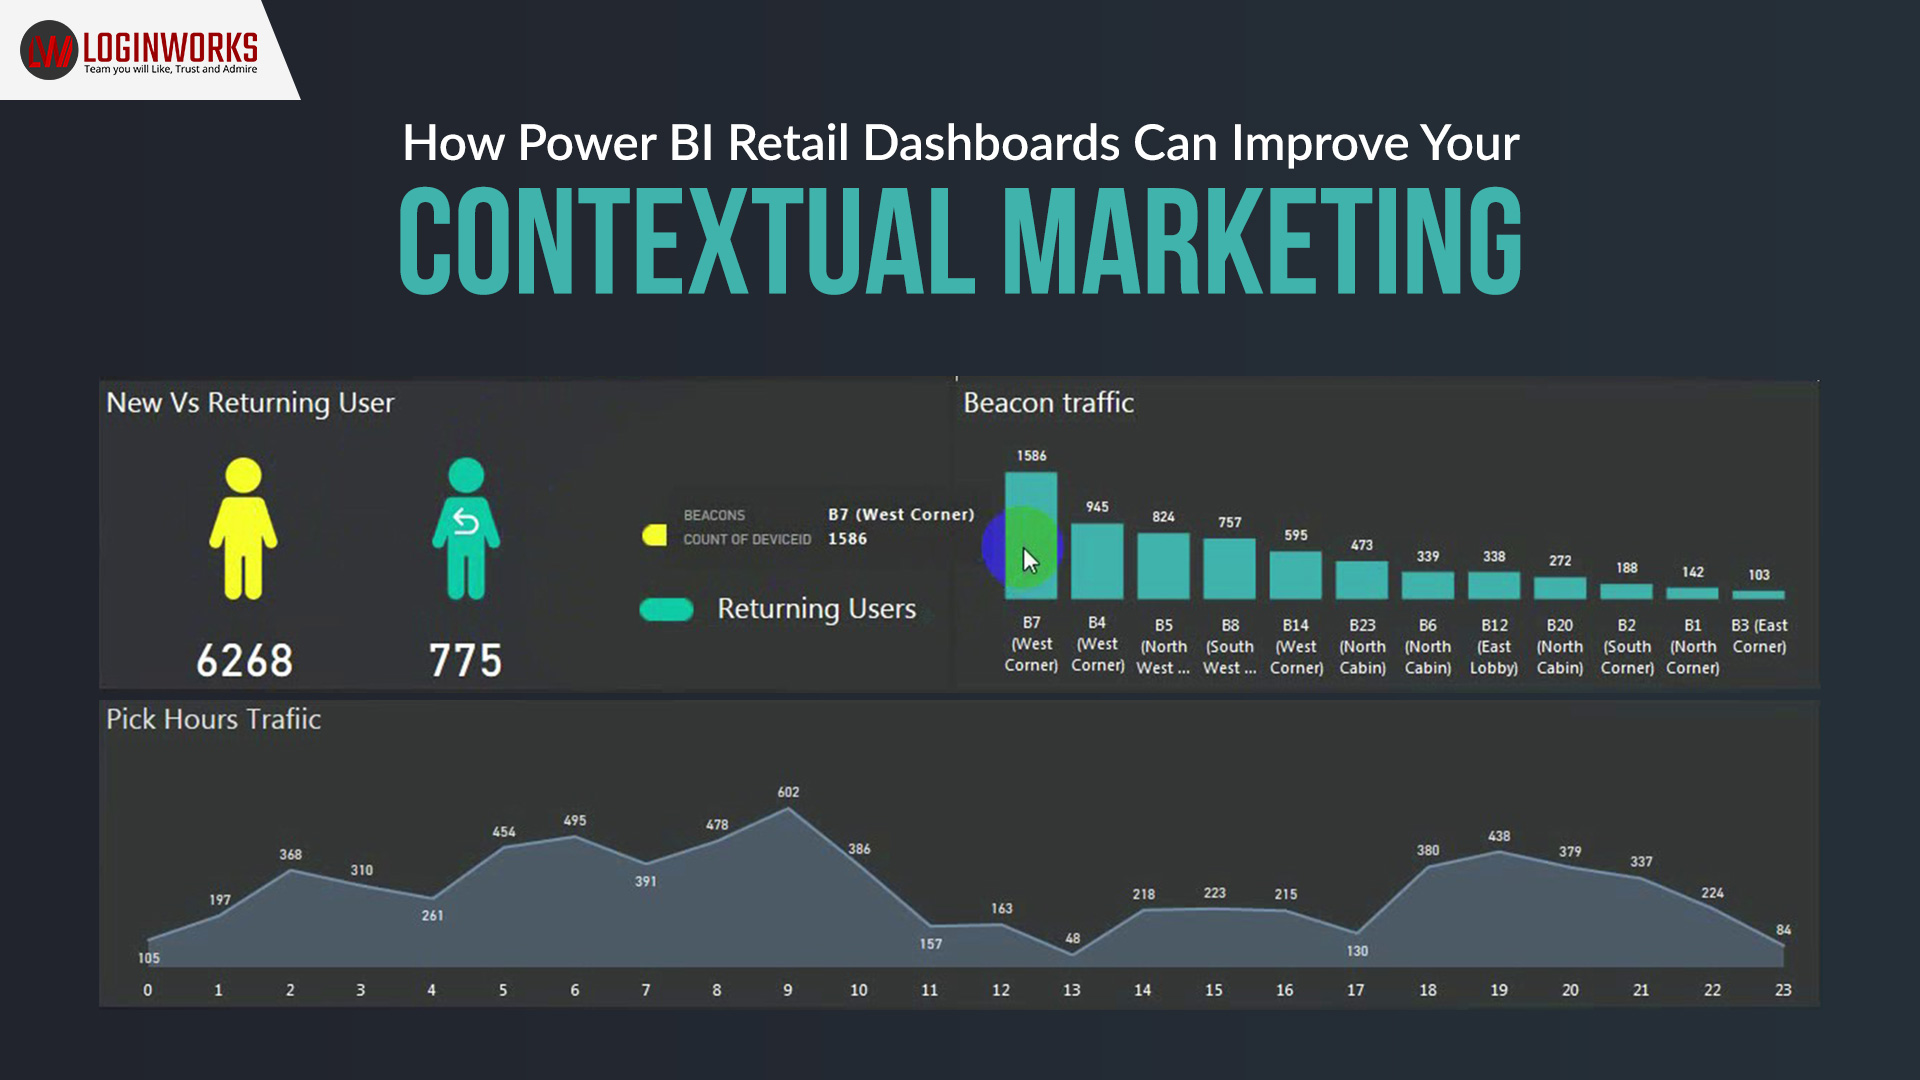 How Power BI Retail Dashboards can improve your contextual marketing